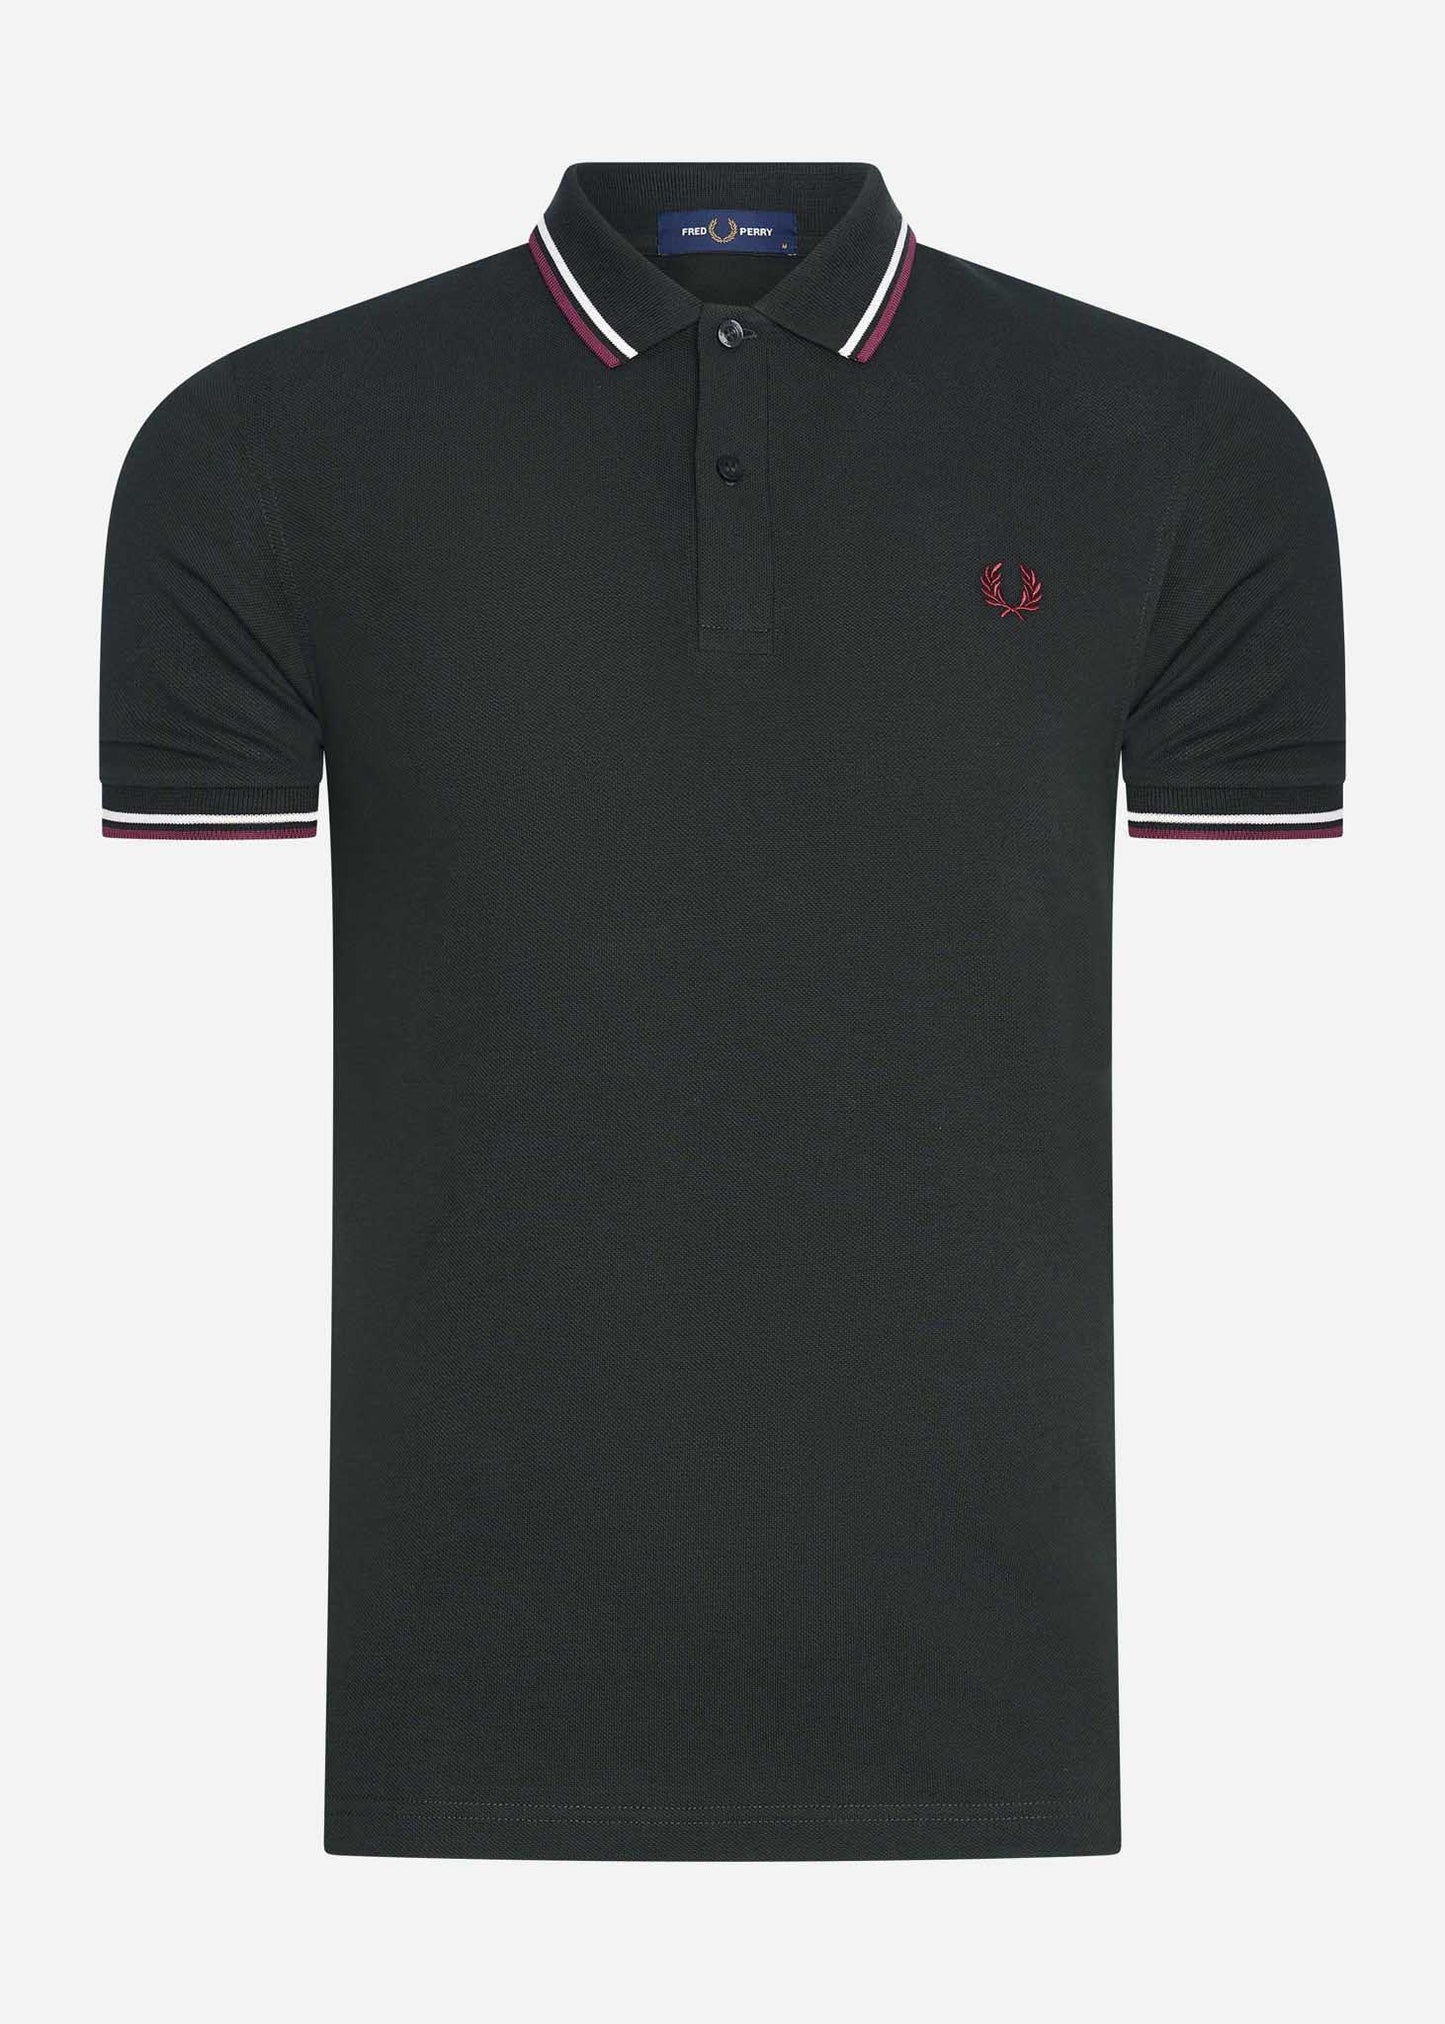 Twin tipped fred perry shirt - night green